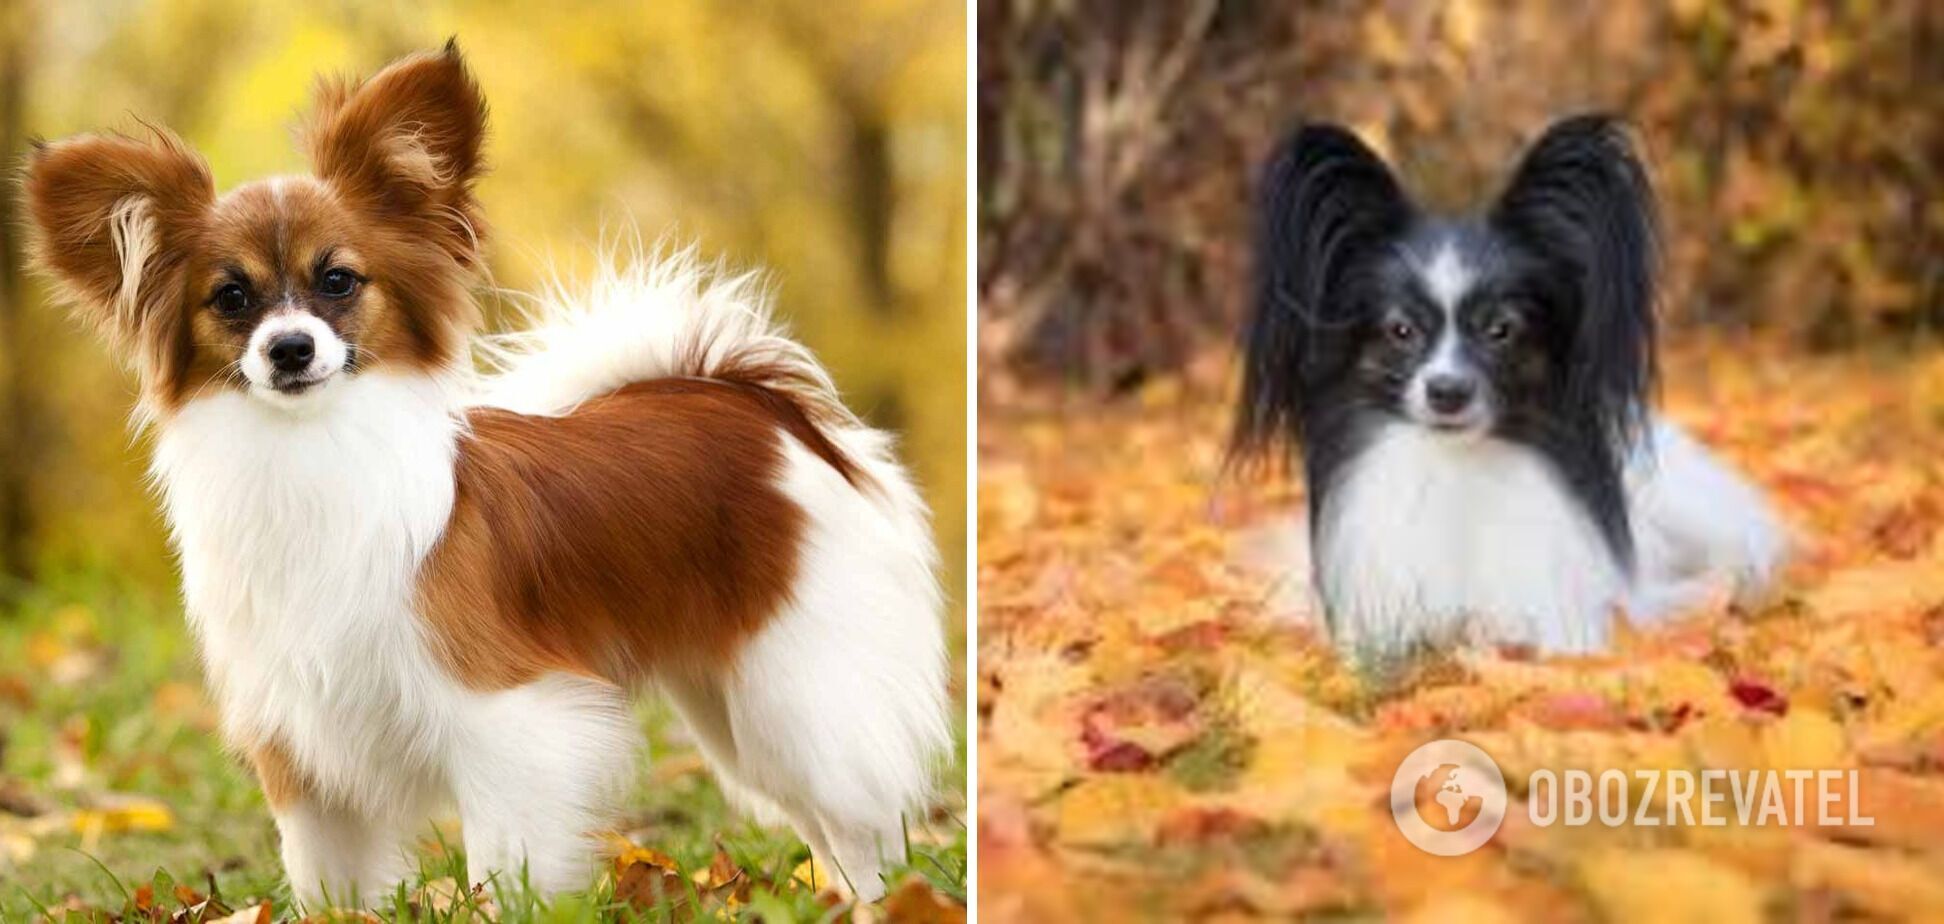 As if they came off the TV screens: what breeds of dogs are the most beautiful. Photo